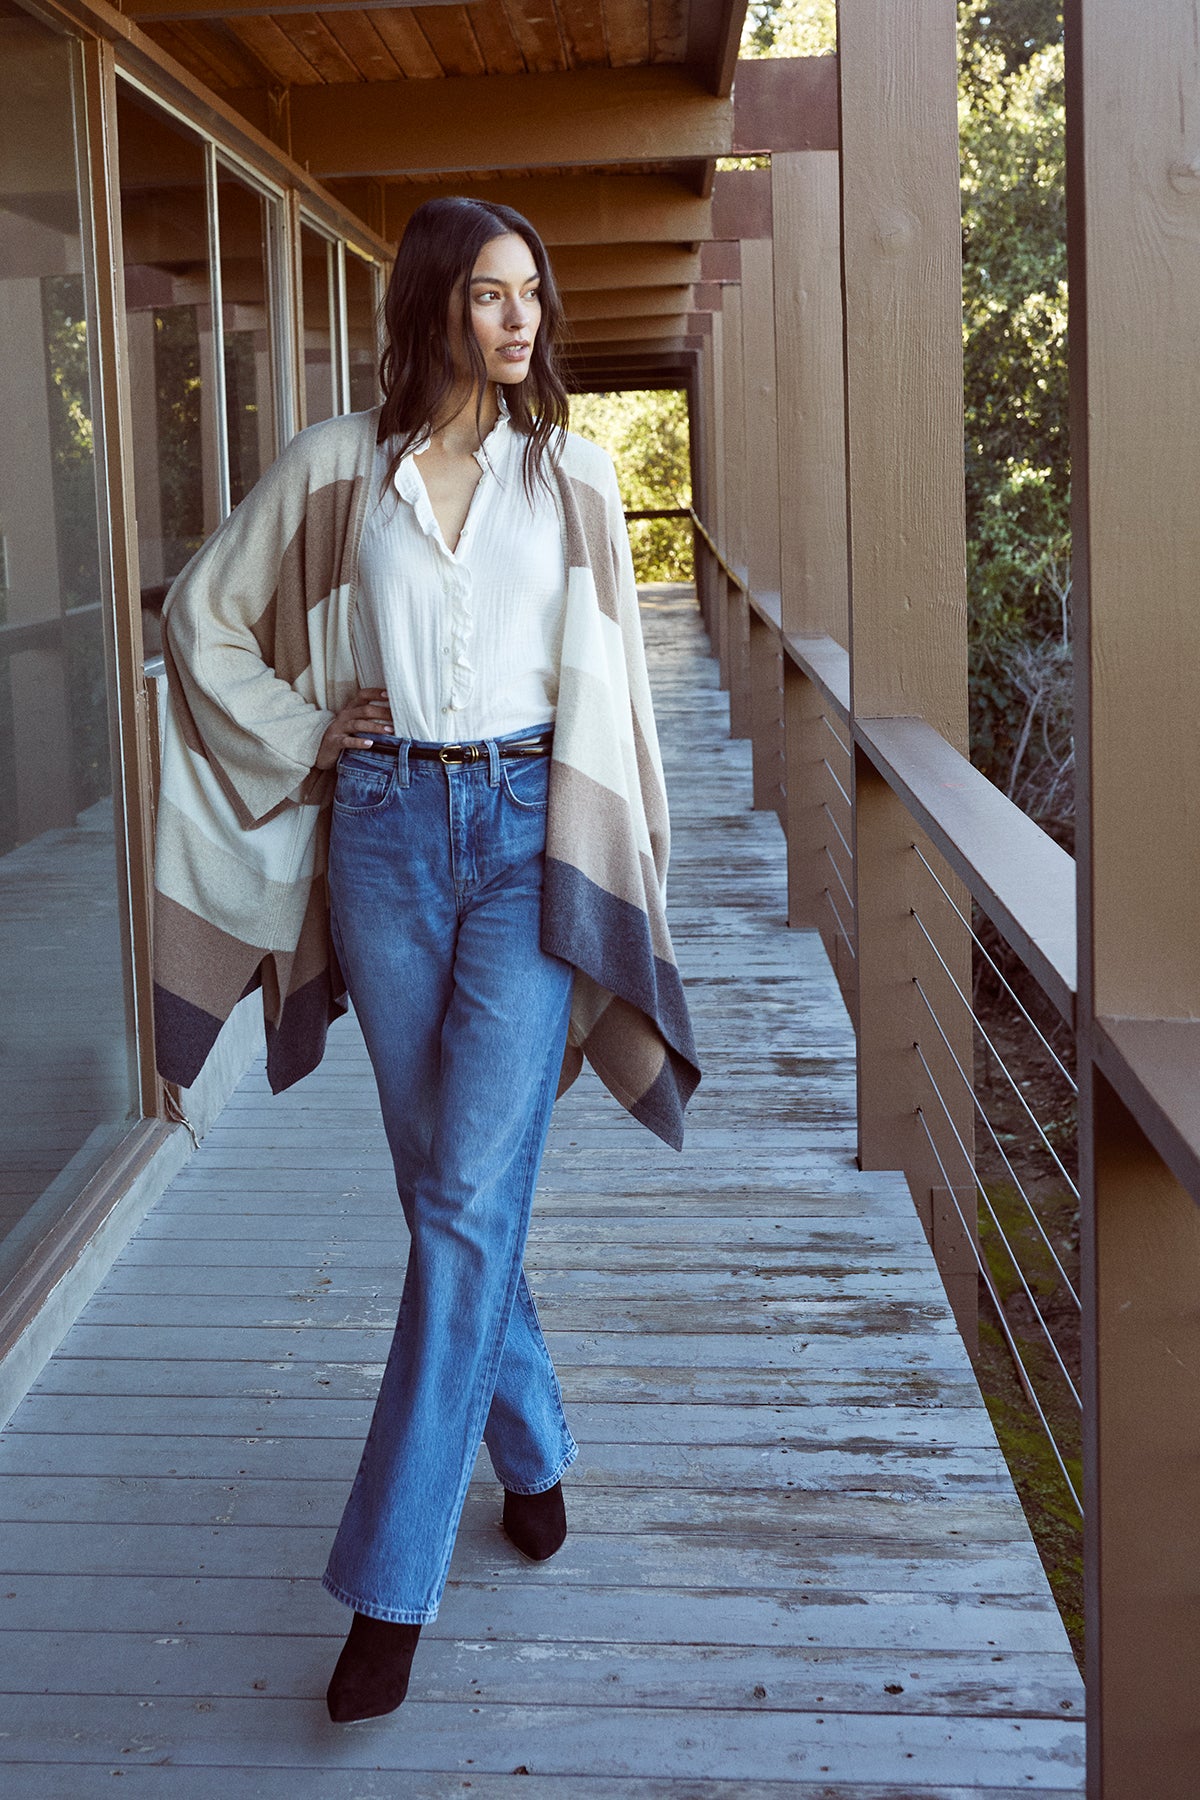 A woman wearing jeans and a cardigan TRISHA COTTON GAUZE TOP by Velvet by Graham & Spencer standing on a porch.-26887711523009